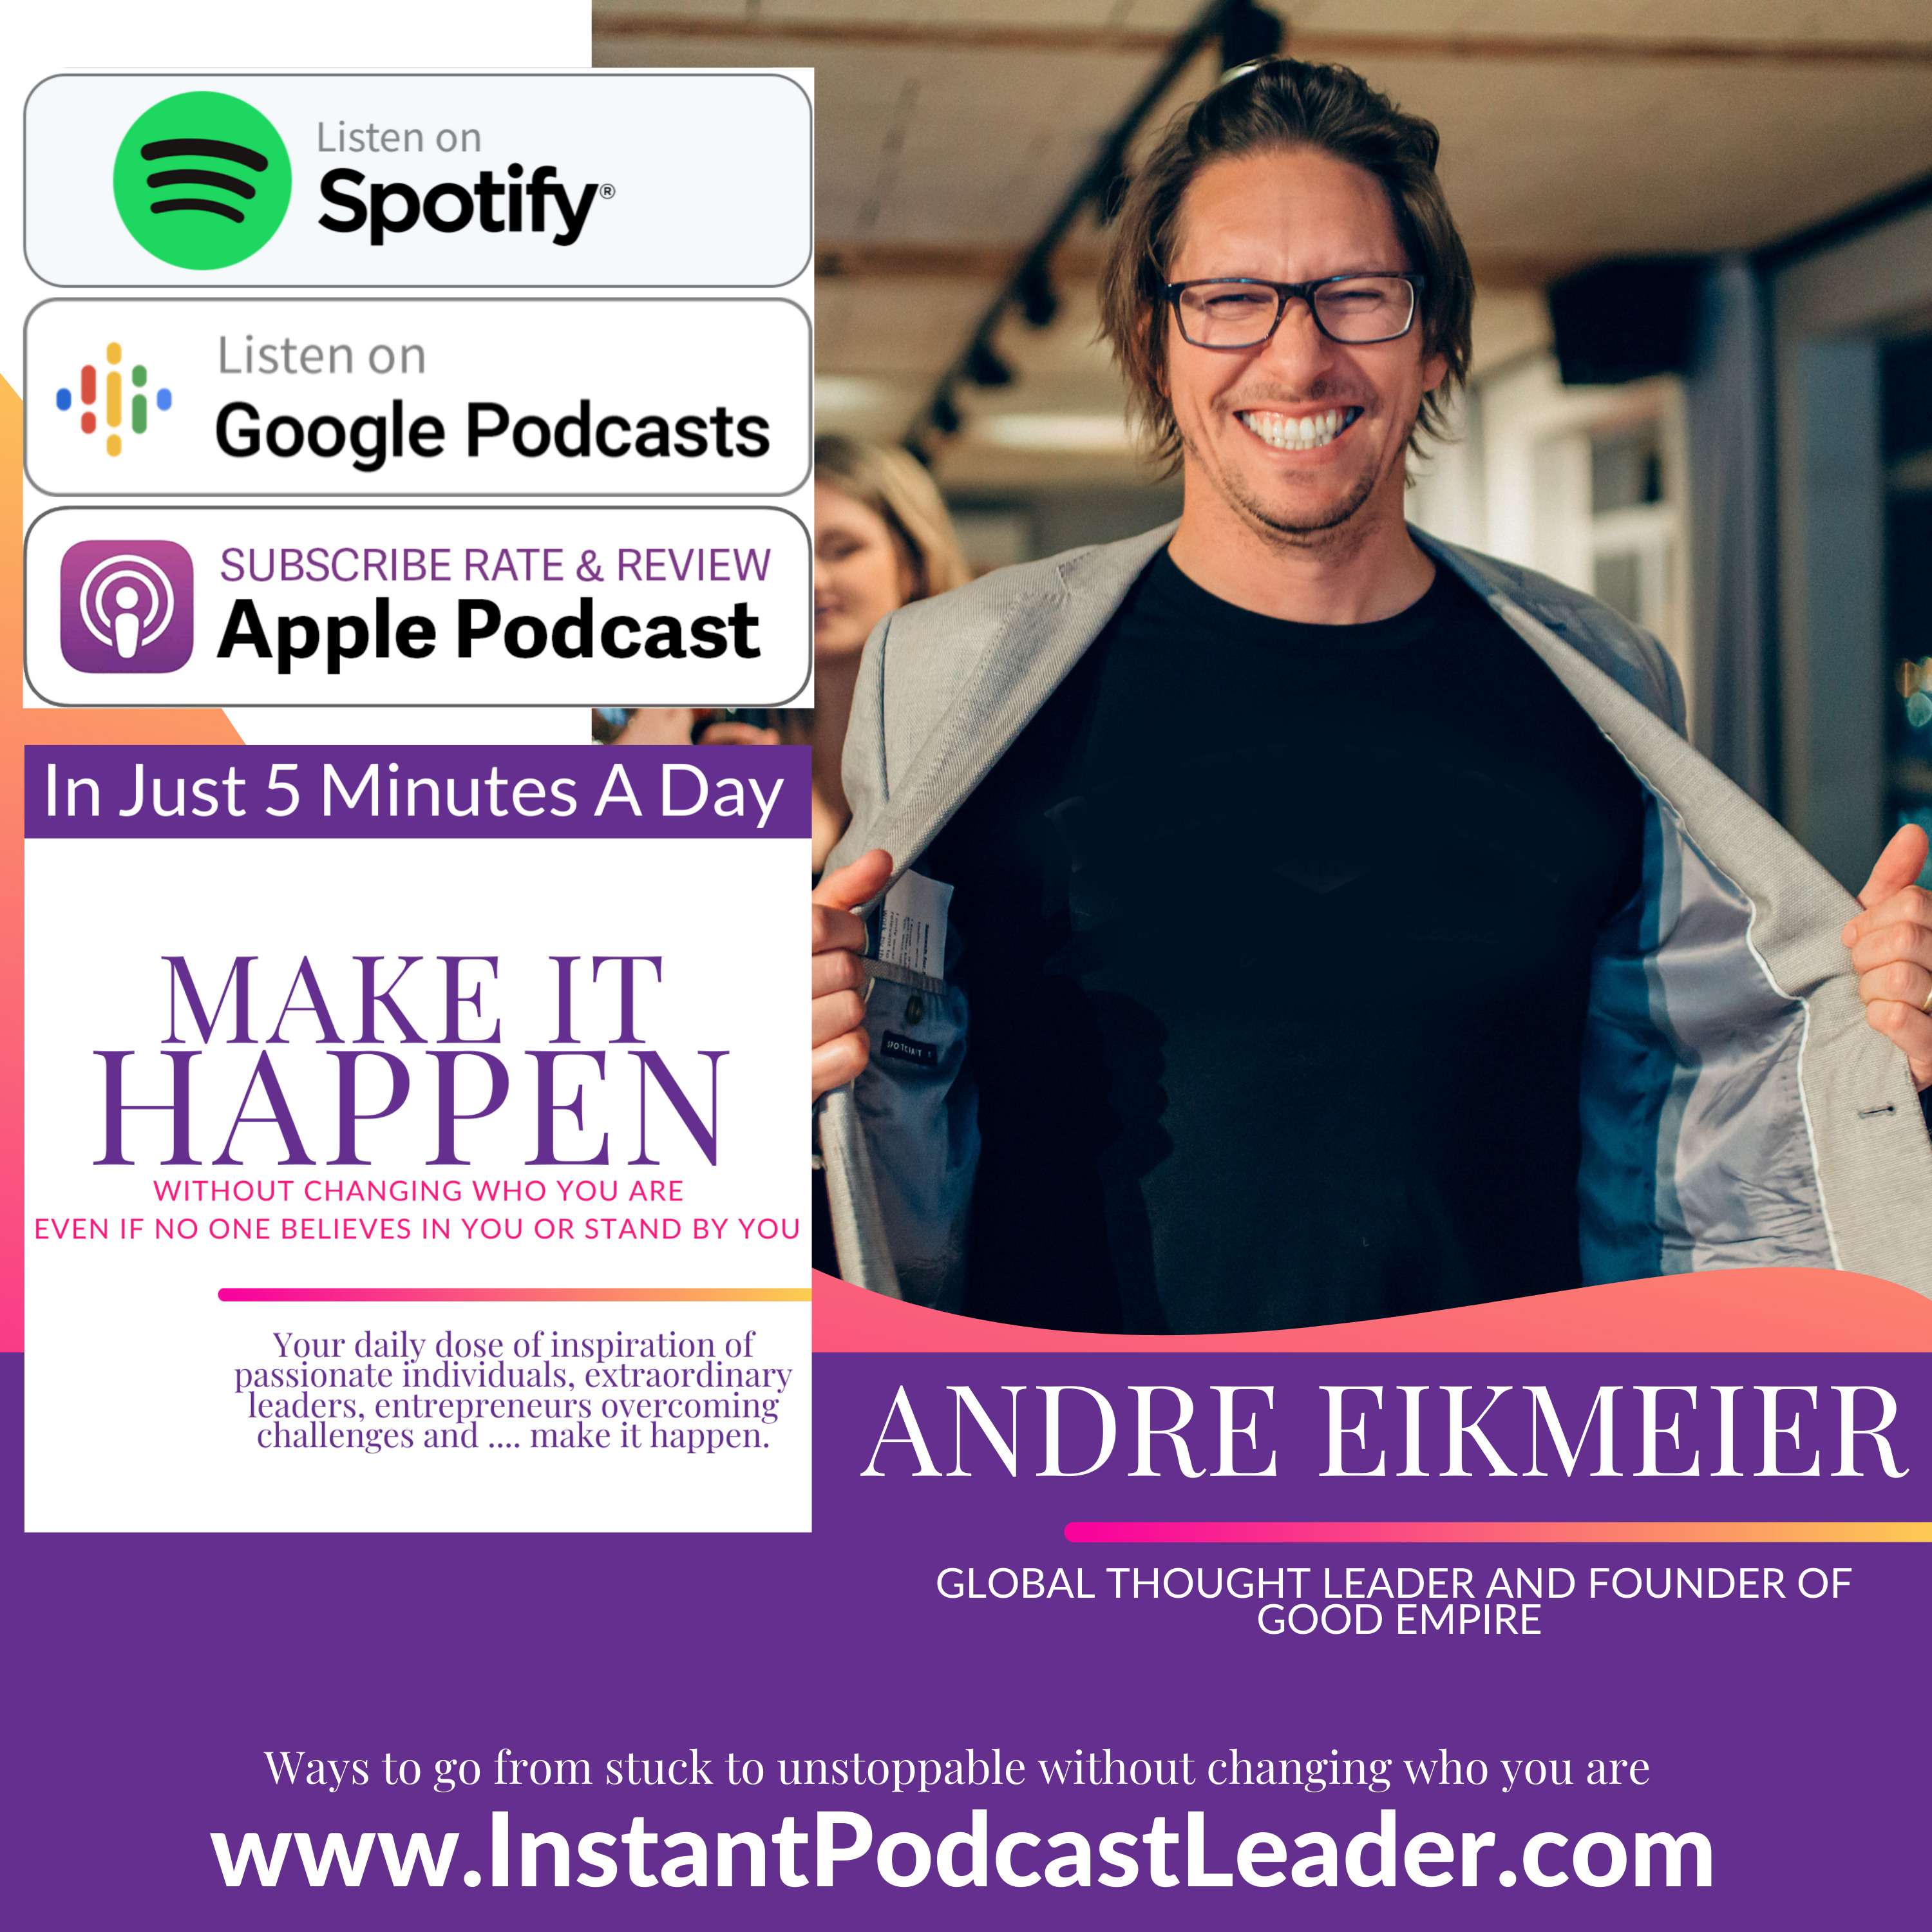 MIH EP35 Andre Eikmeier Global Thought Leader and Founder of Good Empire